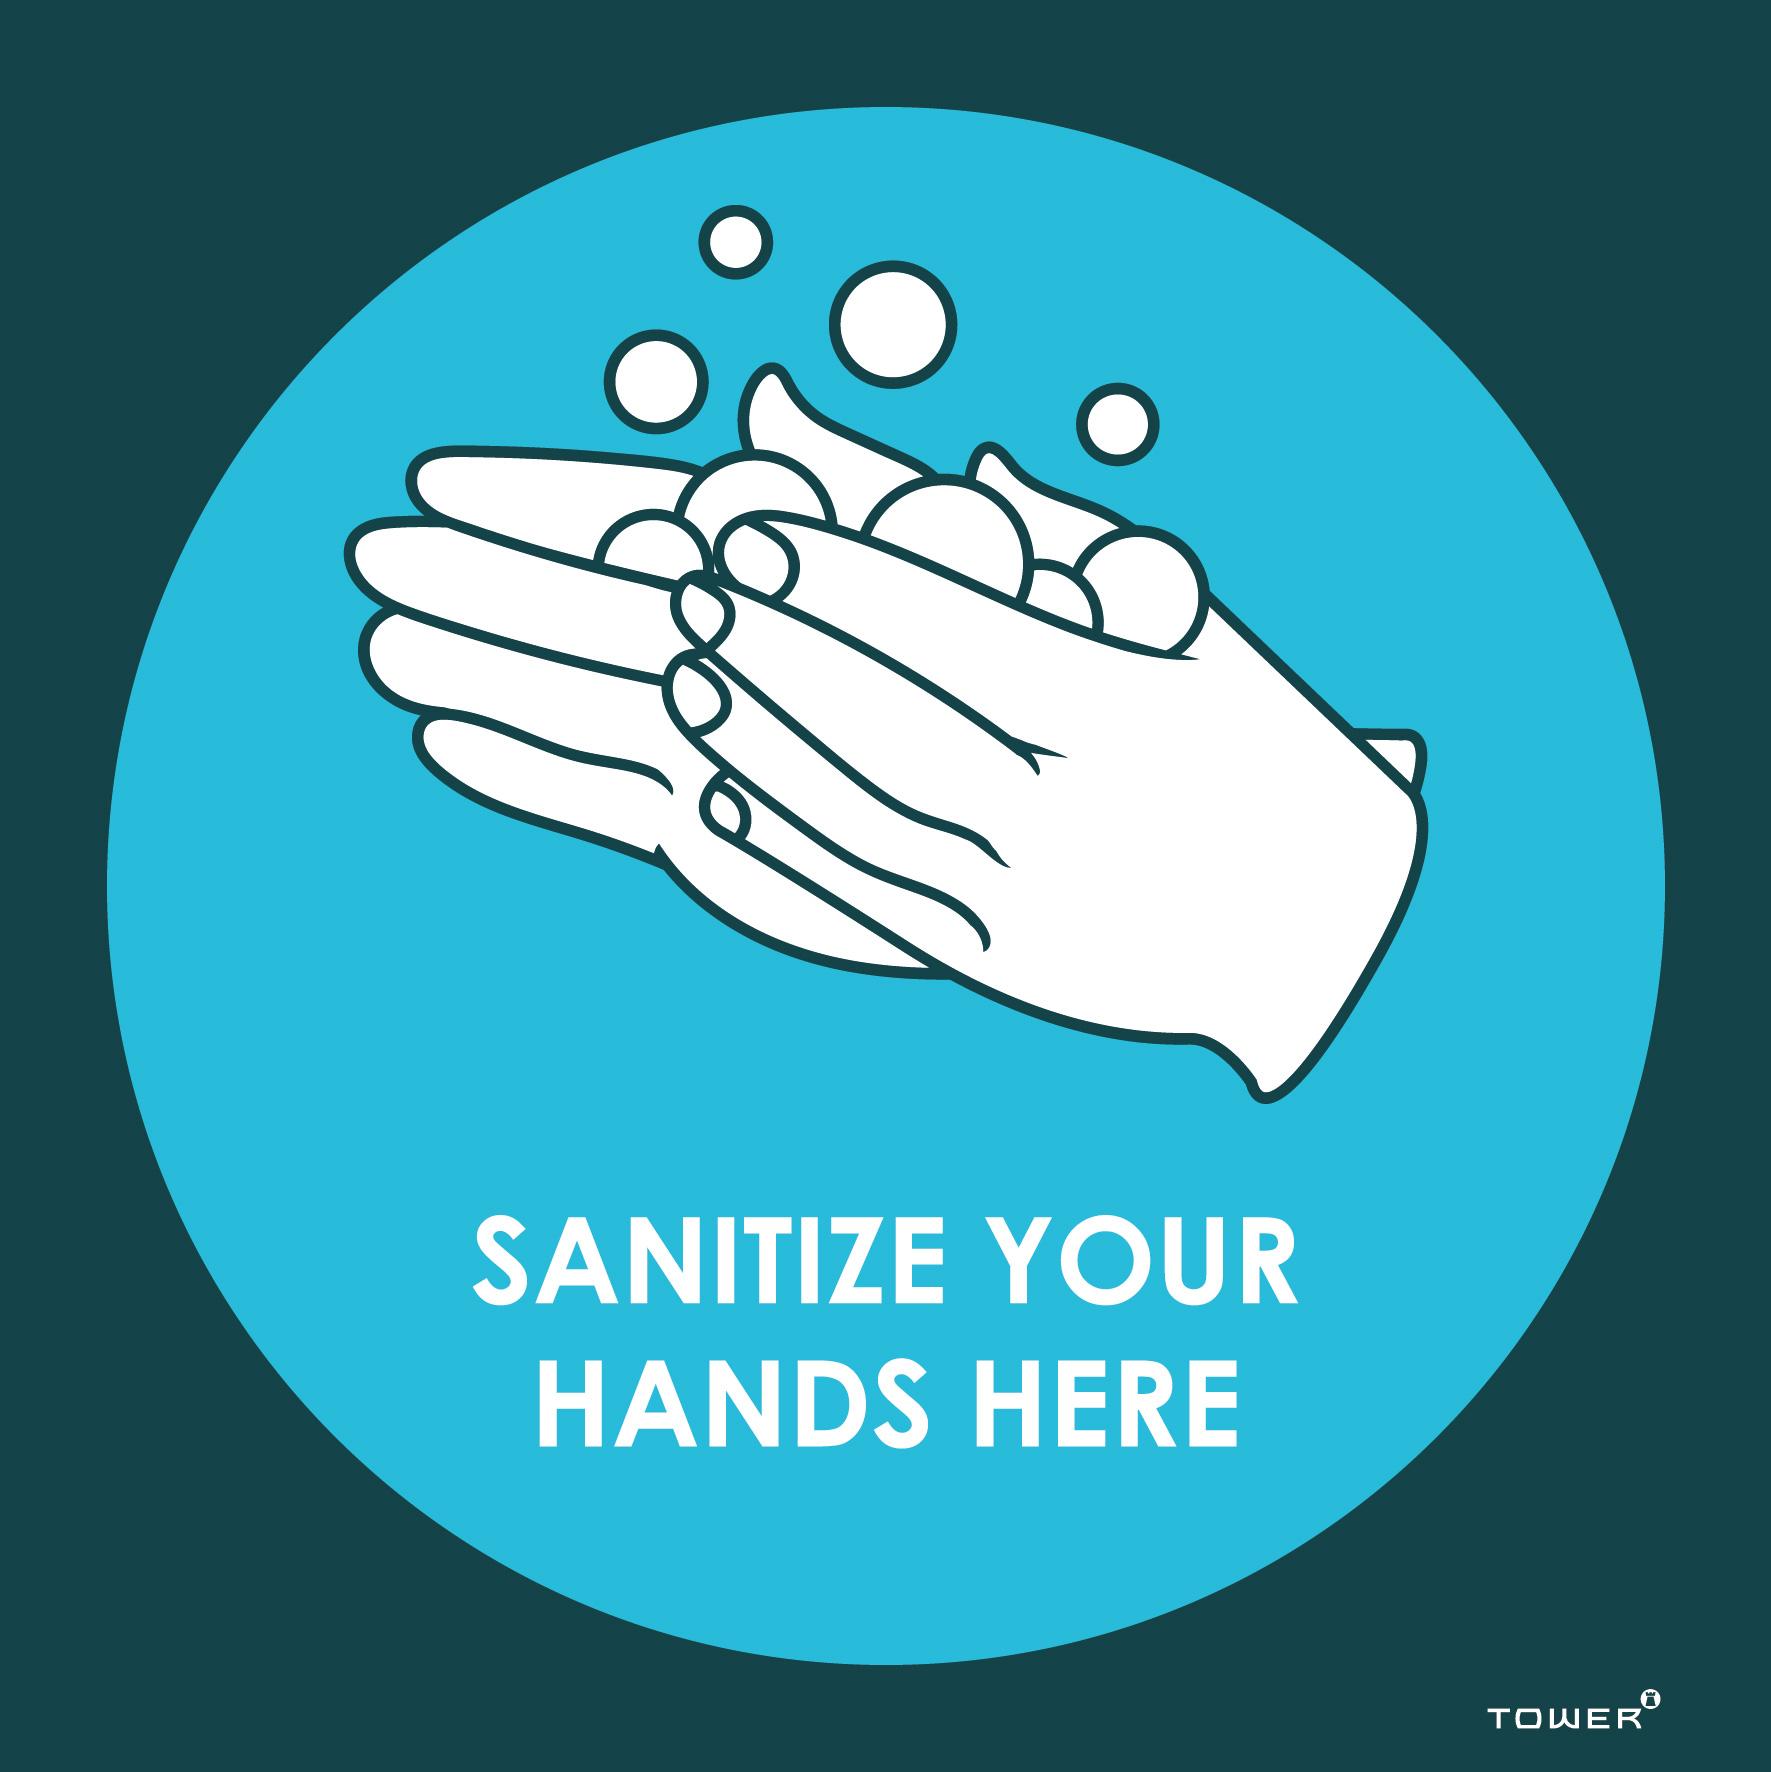 Product Sanitize hands here (1) - 190mm x 190mm ABS - StickerandLabelSA.co.za | Order Stickers & Labels Online image